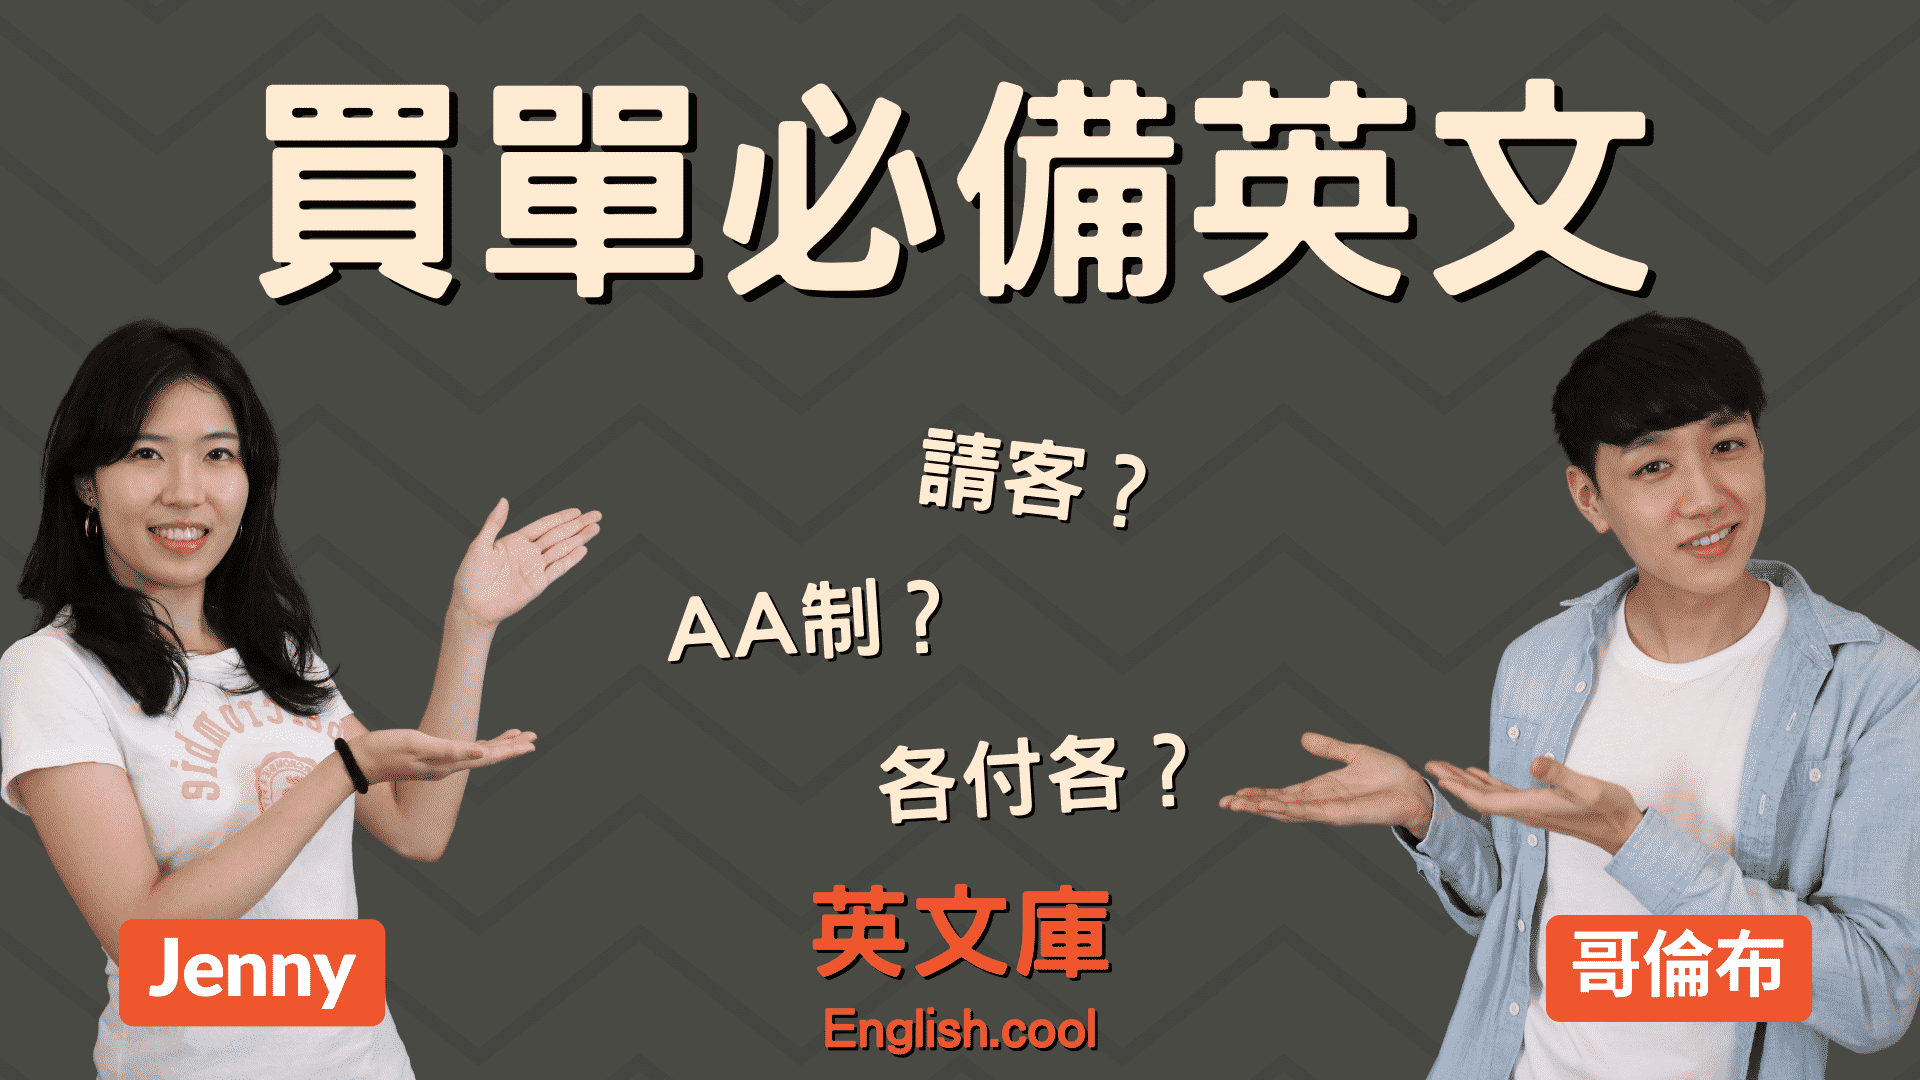 You are currently viewing 【買單必備英文】請客、AA制、各付各 等英文怎麼說？（含對話）